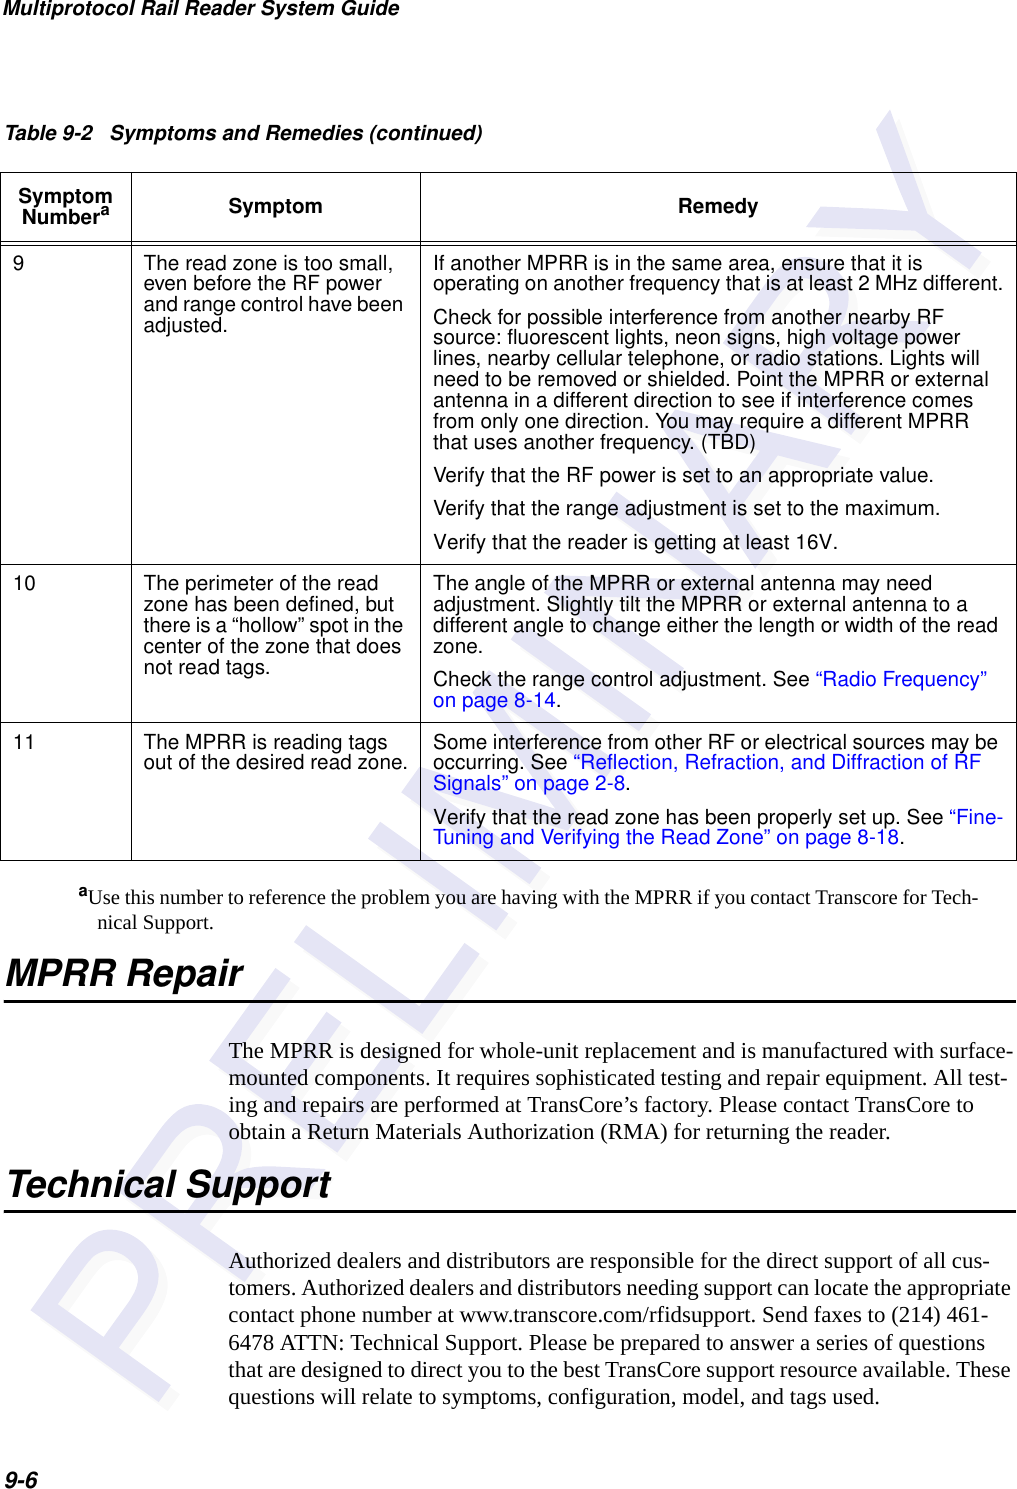 Multiprotocol Rail Reader System Guide9-6aUse this number to reference the problem you are having with the MPRR if you contact Transcore for Tech-nical Support. MPRR RepairThe MPRR is designed for whole-unit replacement and is manufactured with surface-mounted components. It requires sophisticated testing and repair equipment. All test-ing and repairs are performed at TransCore’s factory. Please contact TransCore to obtain a Return Materials Authorization (RMA) for returning the reader.Technical SupportAuthorized dealers and distributors are responsible for the direct support of all cus-tomers. Authorized dealers and distributors needing support can locate the appropriate contact phone number at www.transcore.com/rfidsupport. Send faxes to (214) 461-6478 ATTN: Technical Support. Please be prepared to answer a series of questions that are designed to direct you to the best TransCore support resource available. These questions will relate to symptoms, configuration, model, and tags used.9 The read zone is too small, even before the RF power and range control have been adjusted.If another MPRR is in the same area, ensure that it is operating on another frequency that is at least 2 MHz different.Check for possible interference from another nearby RF source: fluorescent lights, neon signs, high voltage power lines, nearby cellular telephone, or radio stations. Lights will need to be removed or shielded. Point the MPRR or external antenna in a different direction to see if interference comes from only one direction. You may require a different MPRR that uses another frequency. (TBD)Verify that the RF power is set to an appropriate value.Verify that the range adjustment is set to the maximum.Verify that the reader is getting at least 16V. 10 The perimeter of the read zone has been defined, but there is a “hollow” spot in the center of the zone that does not read tags.The angle of the MPRR or external antenna may need adjustment. Slightly tilt the MPRR or external antenna to a different angle to change either the length or width of the read zone.Check the range control adjustment. See “Radio Frequency” on page 8-14. 11 The MPRR is reading tags out of the desired read zone. Some interference from other RF or electrical sources may be occurring. See “Reflection, Refraction, and Diffraction of RF Signals” on page 2-8. Verify that the read zone has been properly set up. See “Fine-Tuning and Verifying the Read Zone” on page 8-18.Table 9-2   Symptoms and Remedies (continued)Symptom NumberaSymptom Remedy